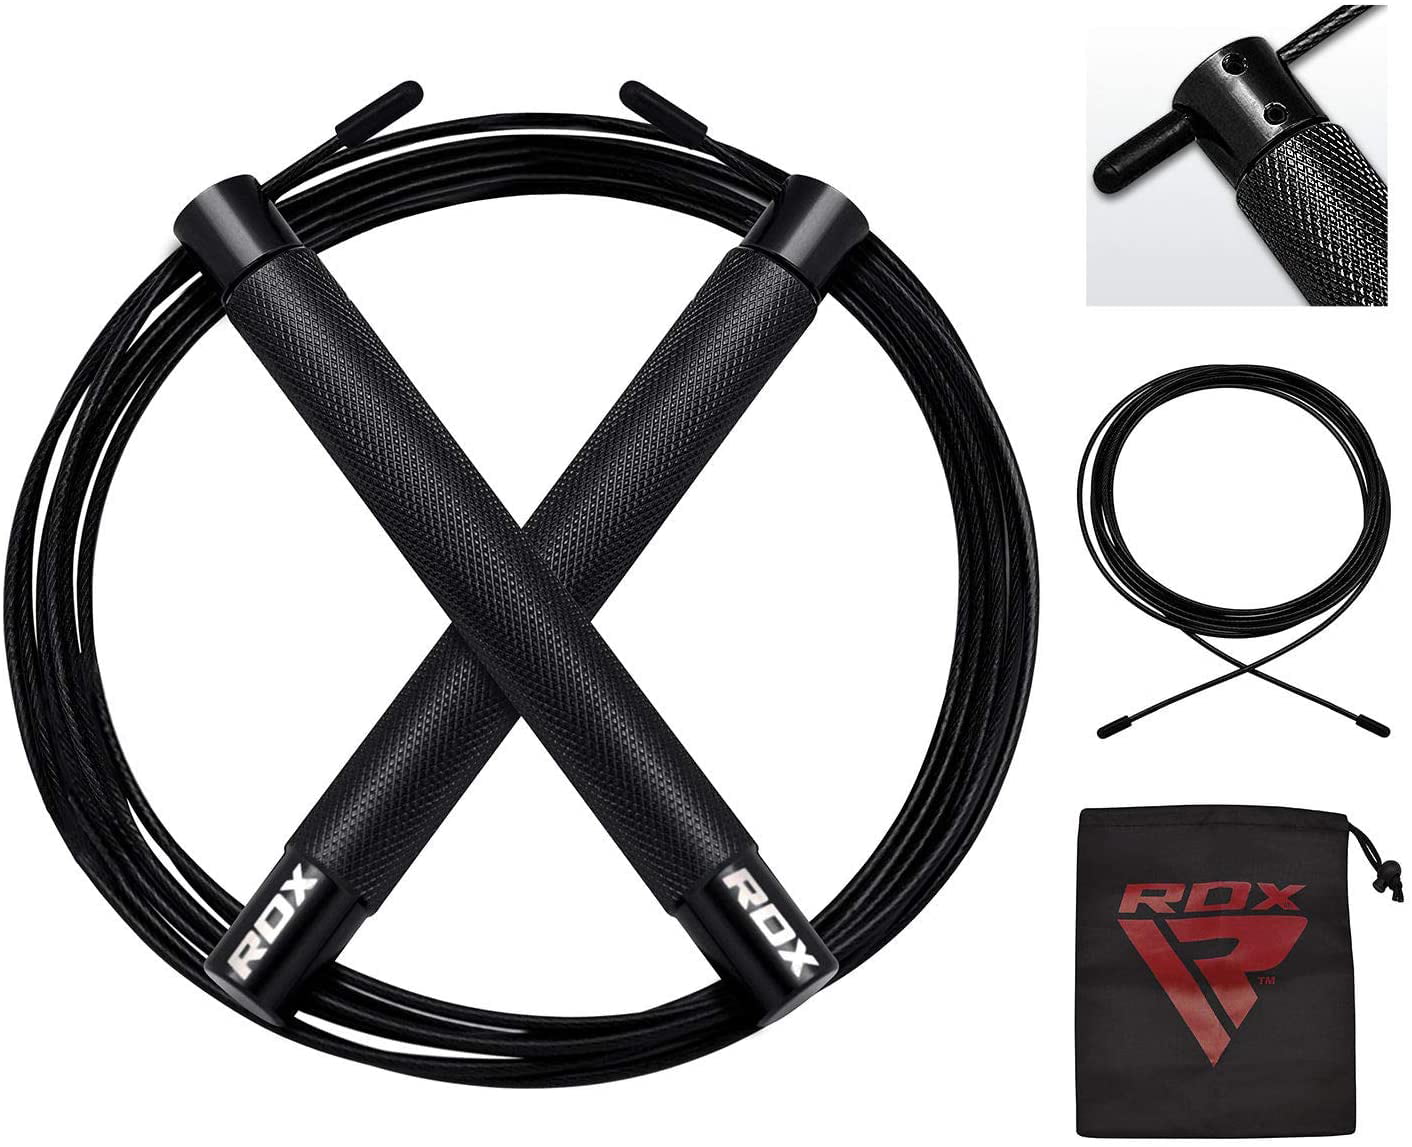 RDX Skipping Rope Adjustable PVC Jump Speed MMA Boxing Lose Gym Weight Gymnastics Fitness Jumping Metal Cable Workout Exercise Training